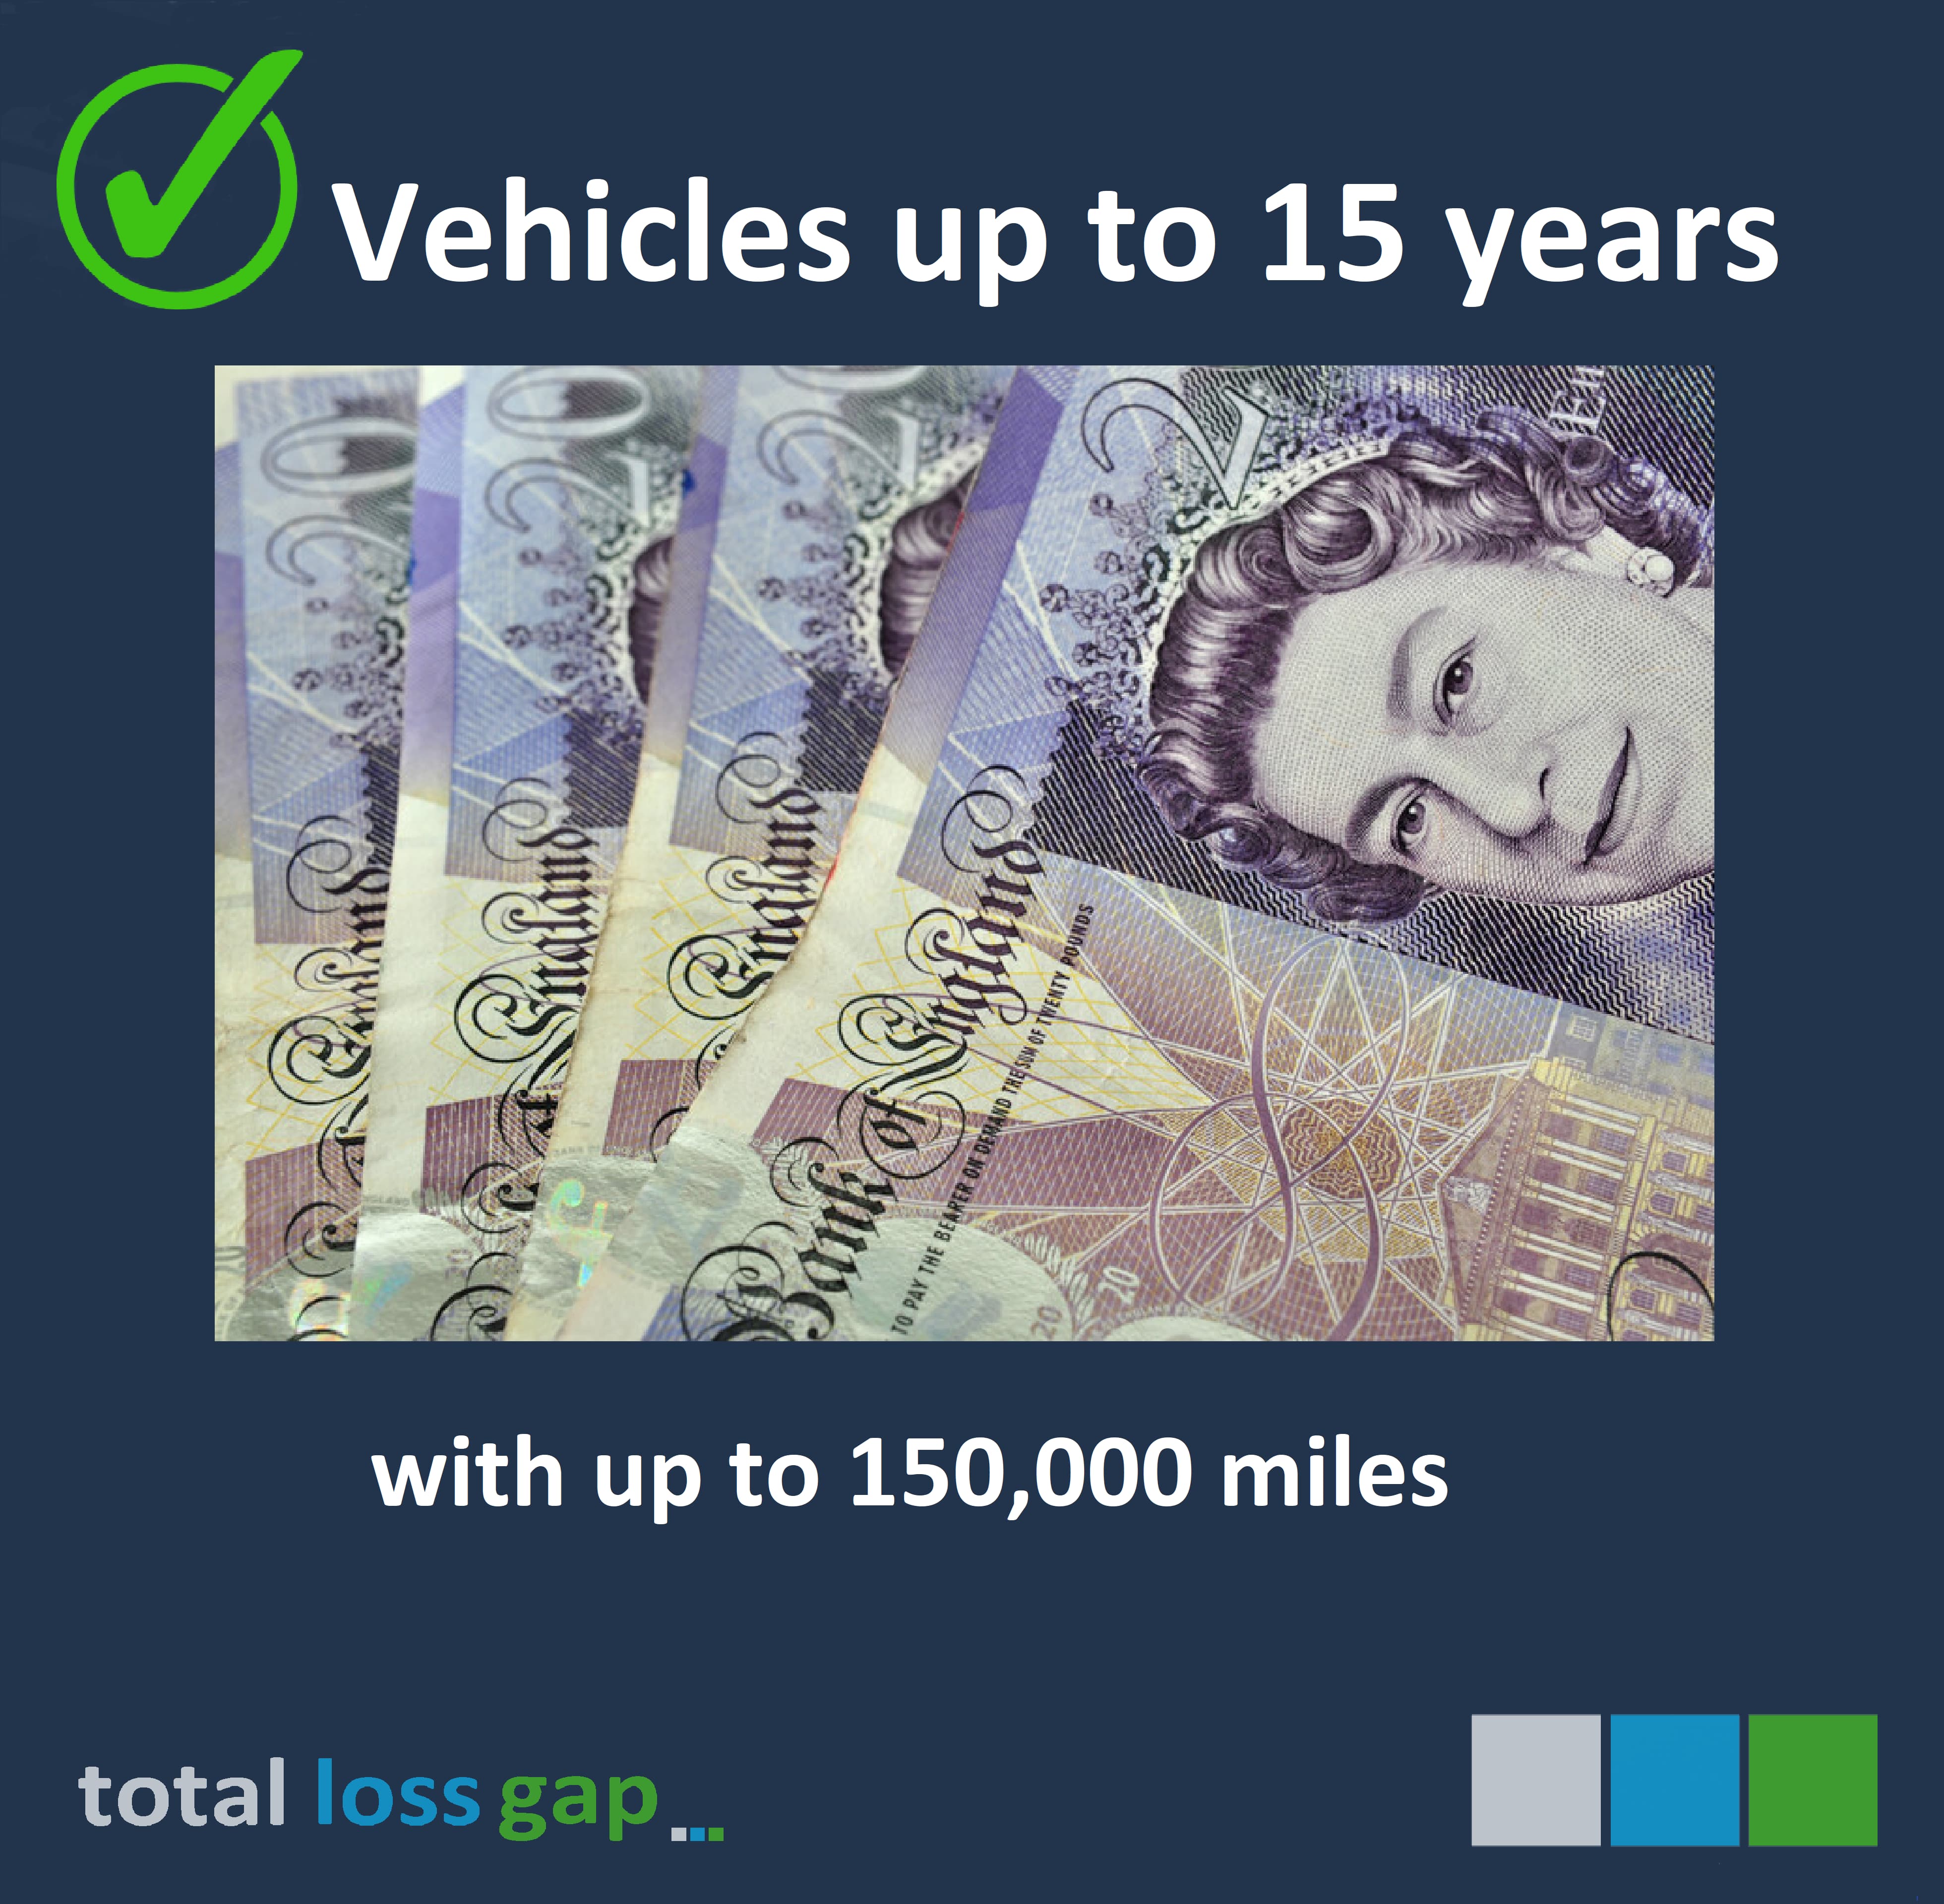 You can buy excess insurance for cars up to 15 years old